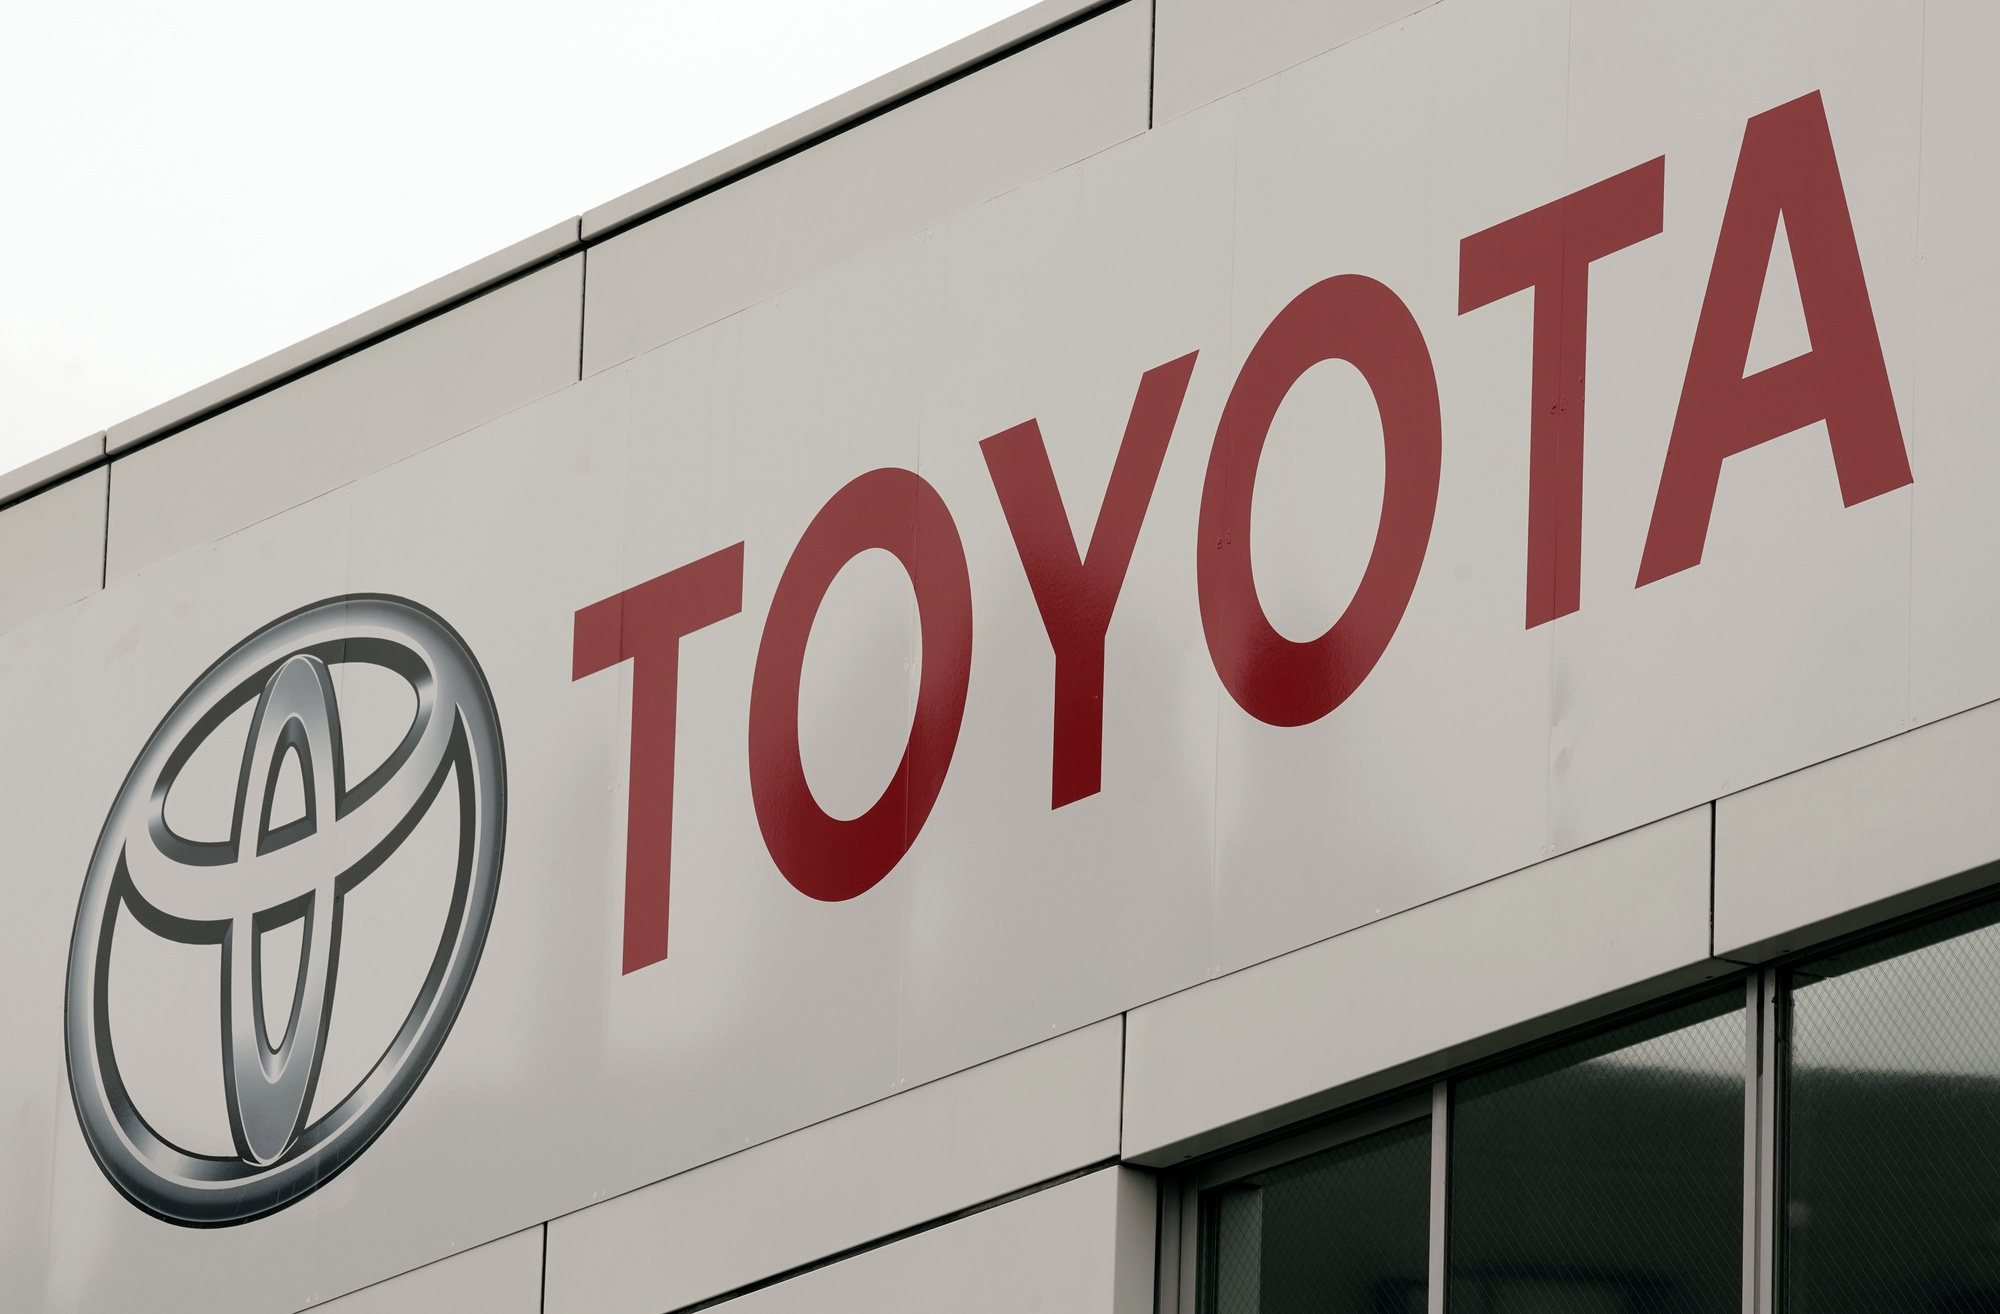 epa08415994 The logo of Toyota Motor is seen at a dealer in Tokyo, Japan, 12 May 2020. Toyota Motor Corp. said on 12 May 2020 that it expects to post its lowest operating profit in the fiscal year ending on 31 March, down 80 percent due to the coronavirus pandemic and its effects on the economy.  EPA/KIMIMASA MAYAMA